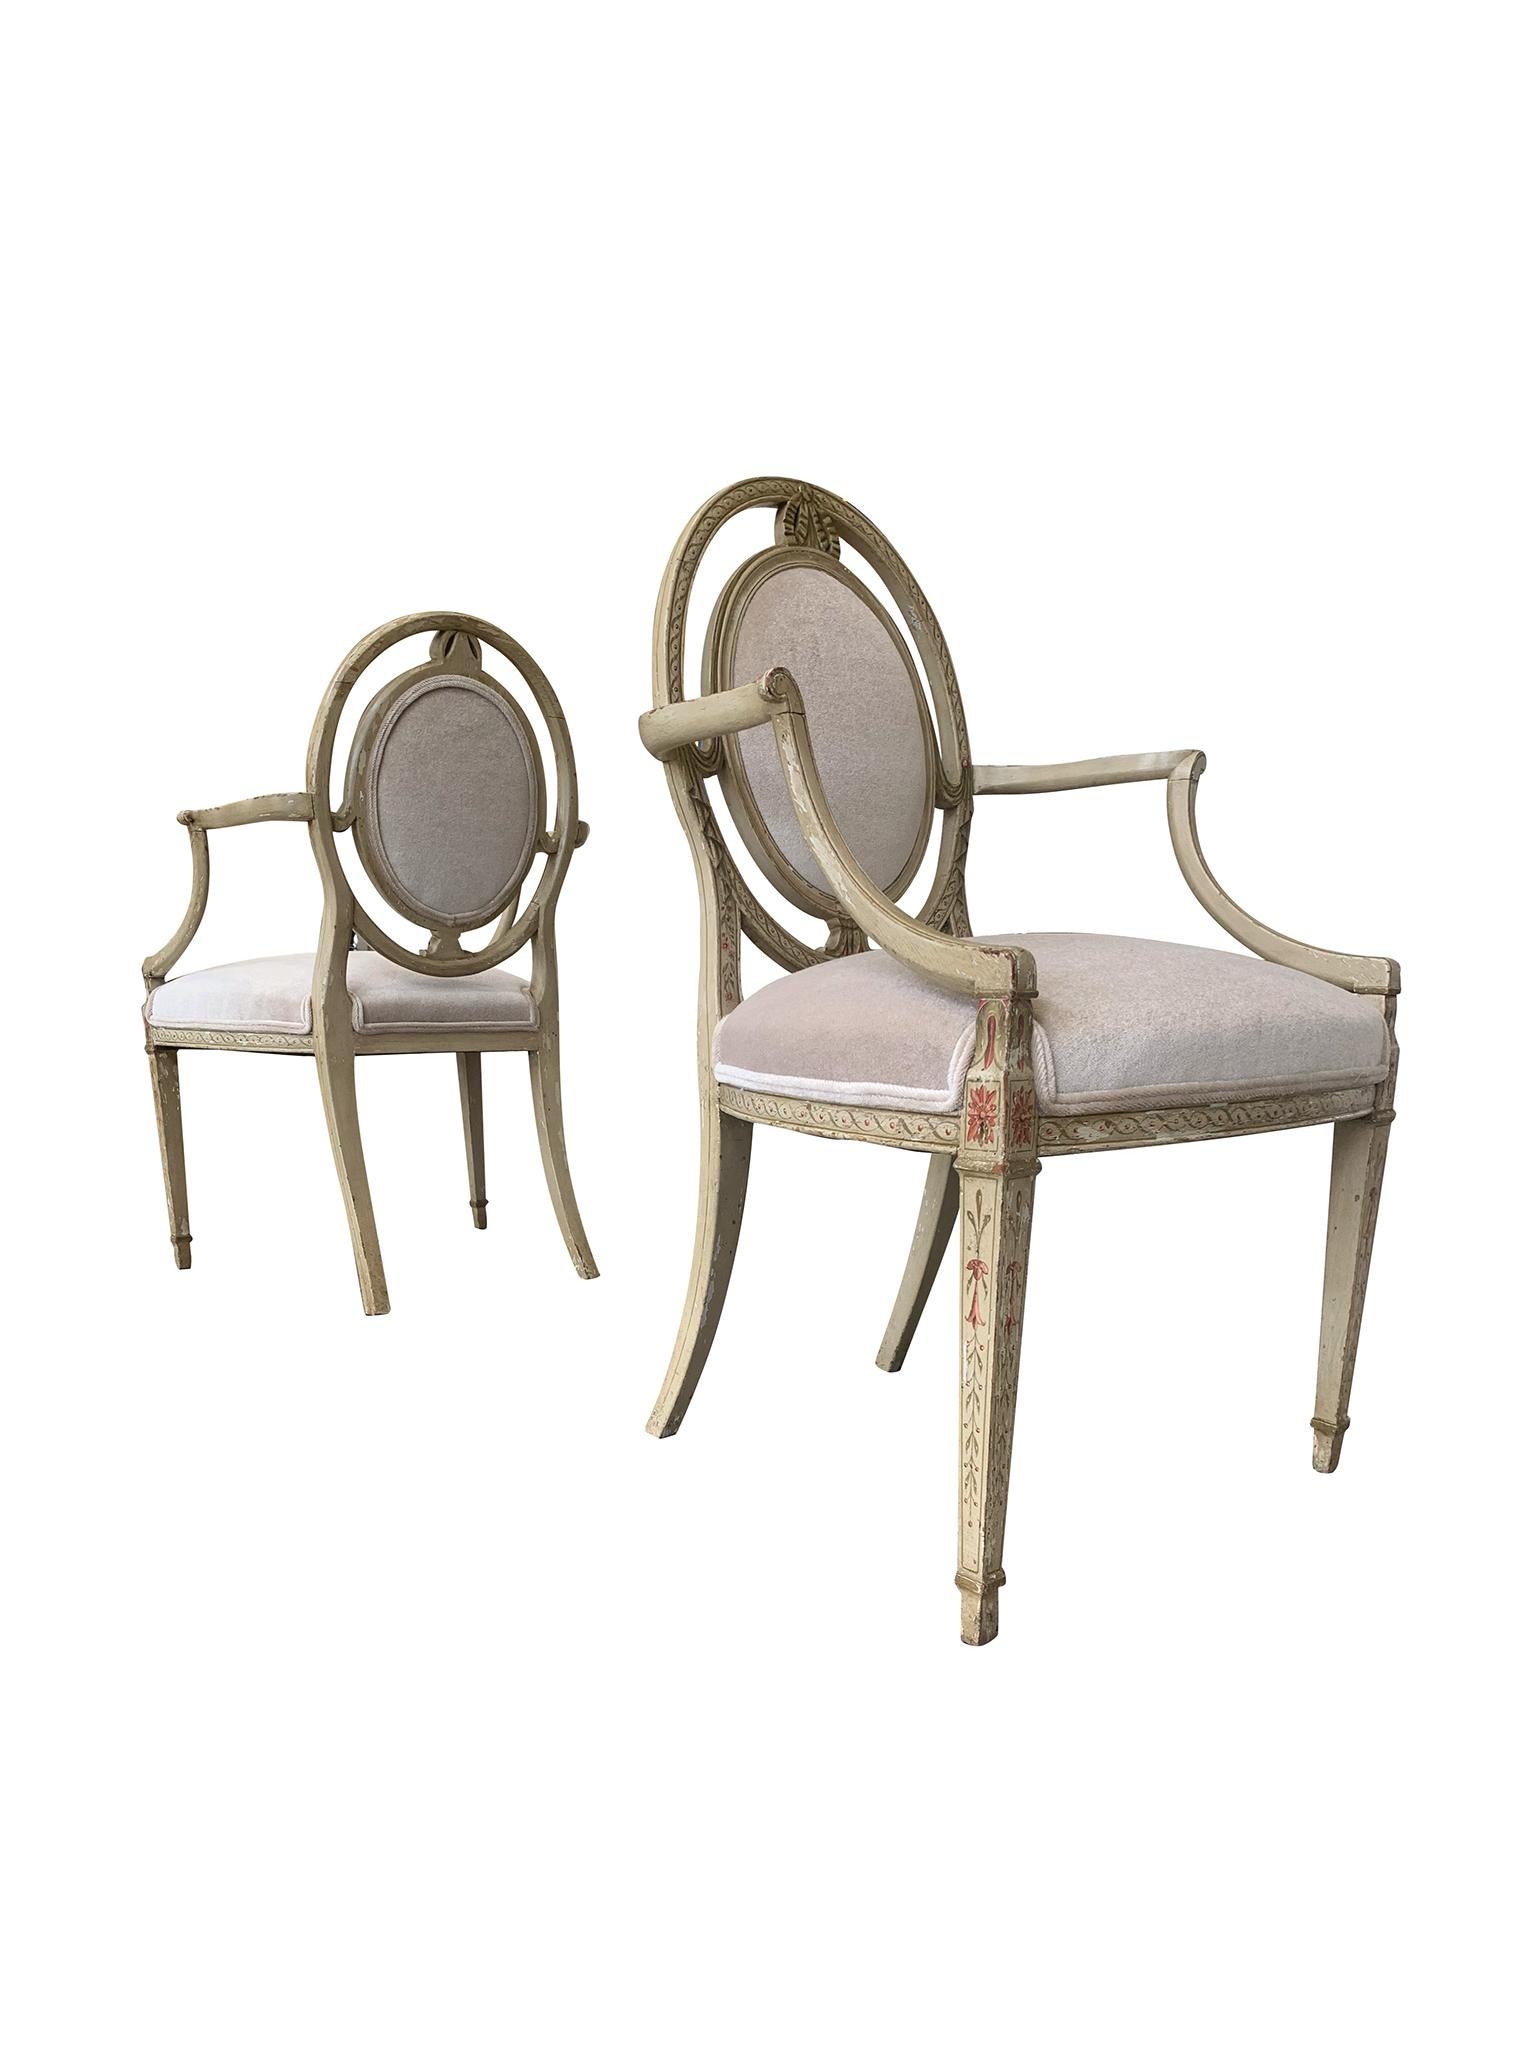 Swedish Pair of Antique Hand-Painted Gustavian Armchairs